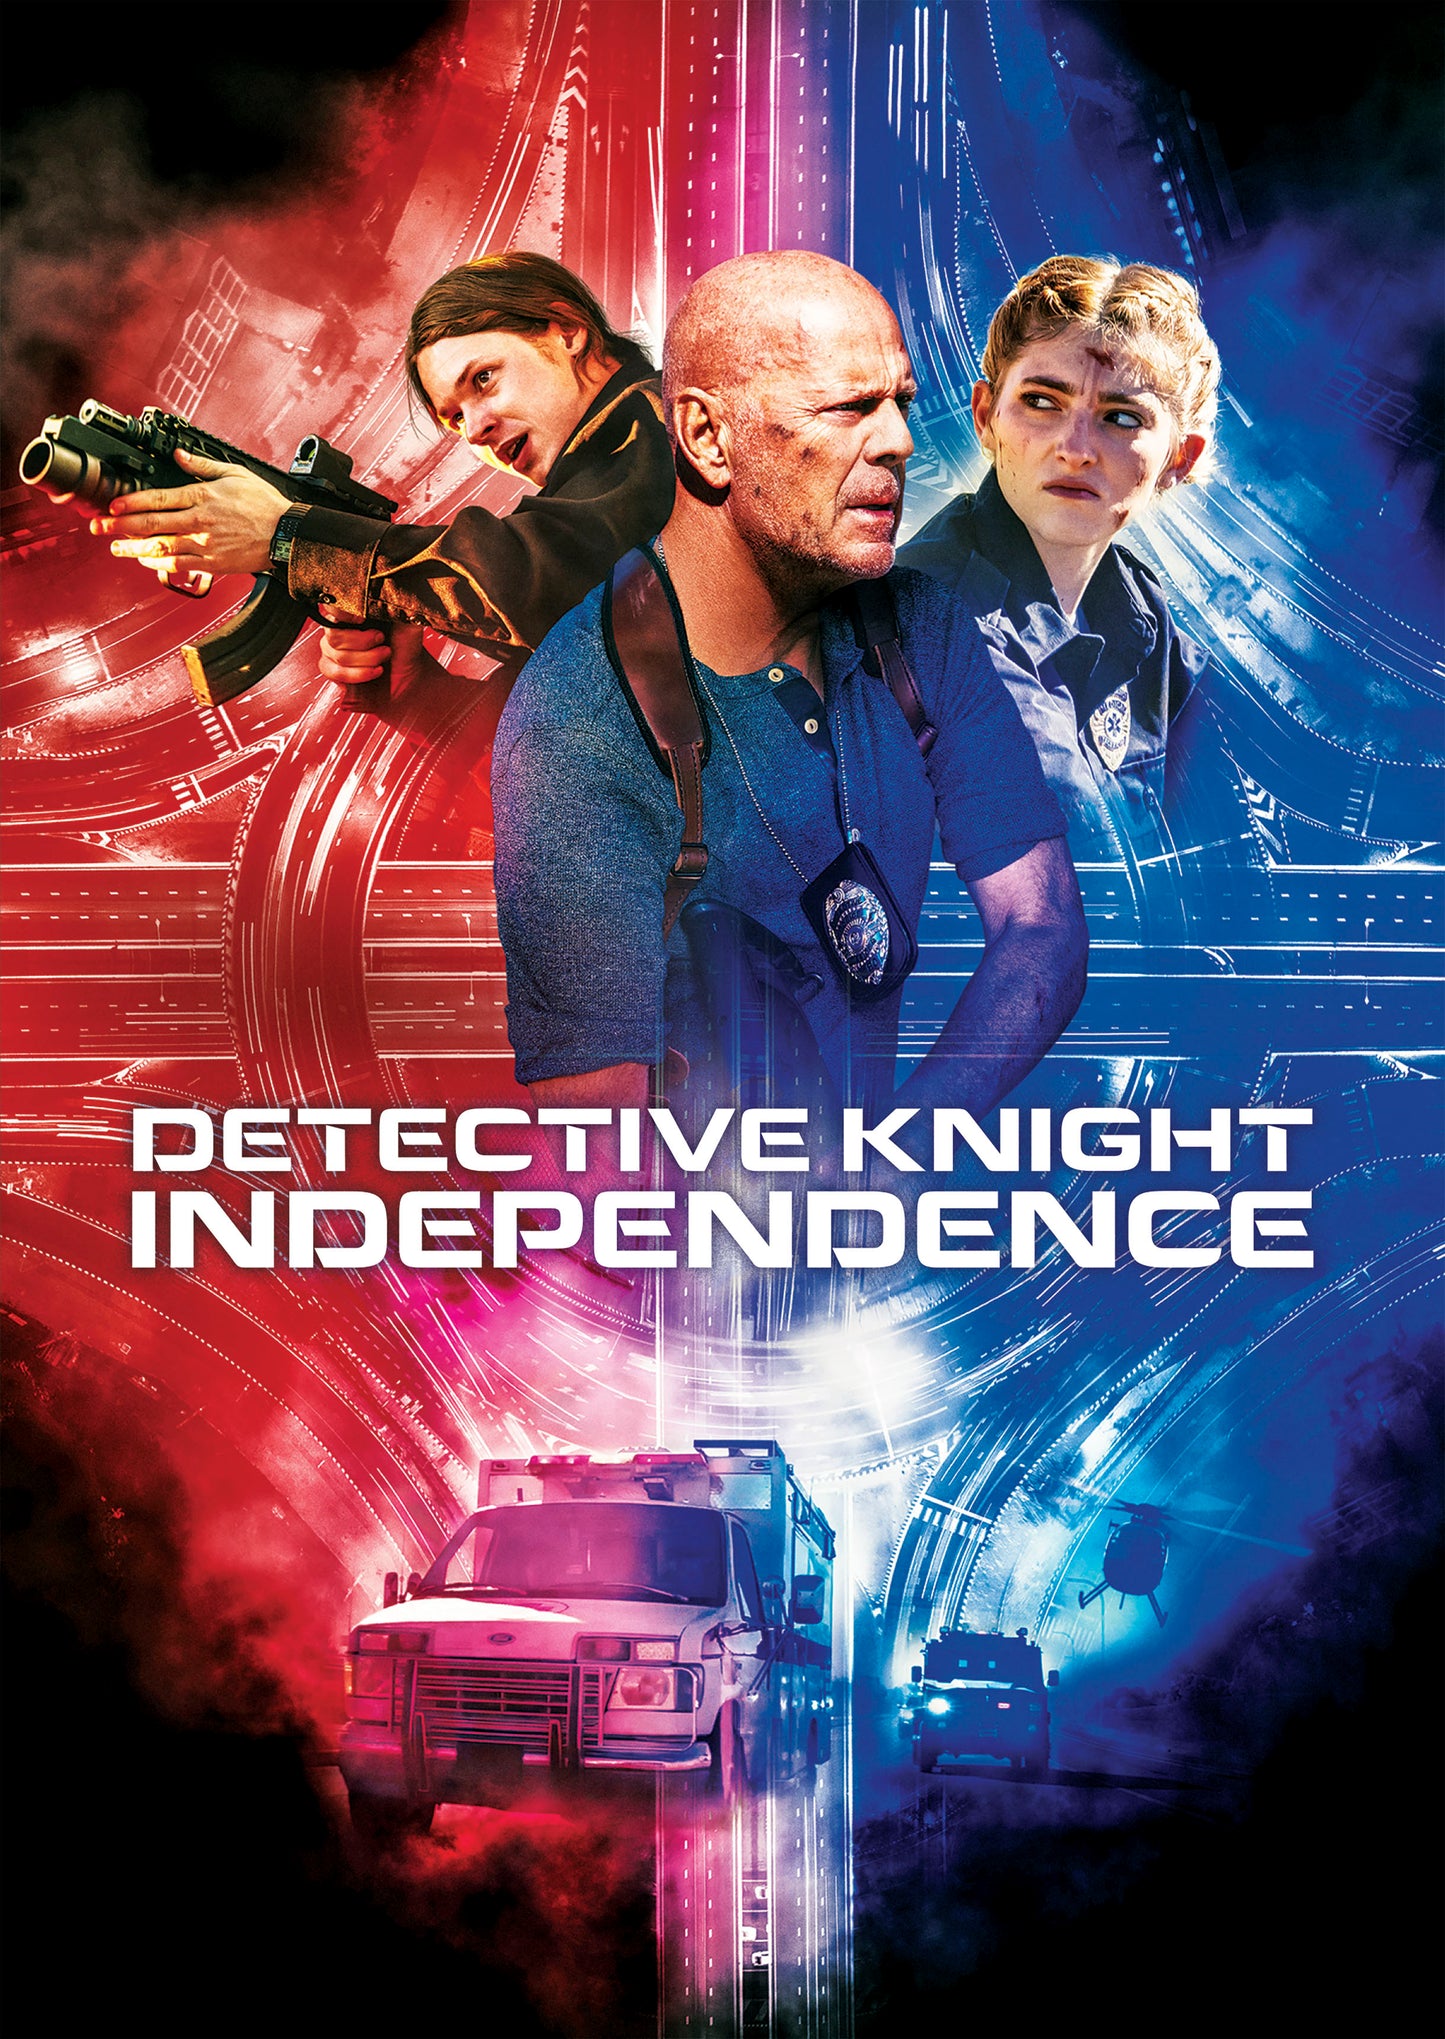 Detective Knight: Independence cover art